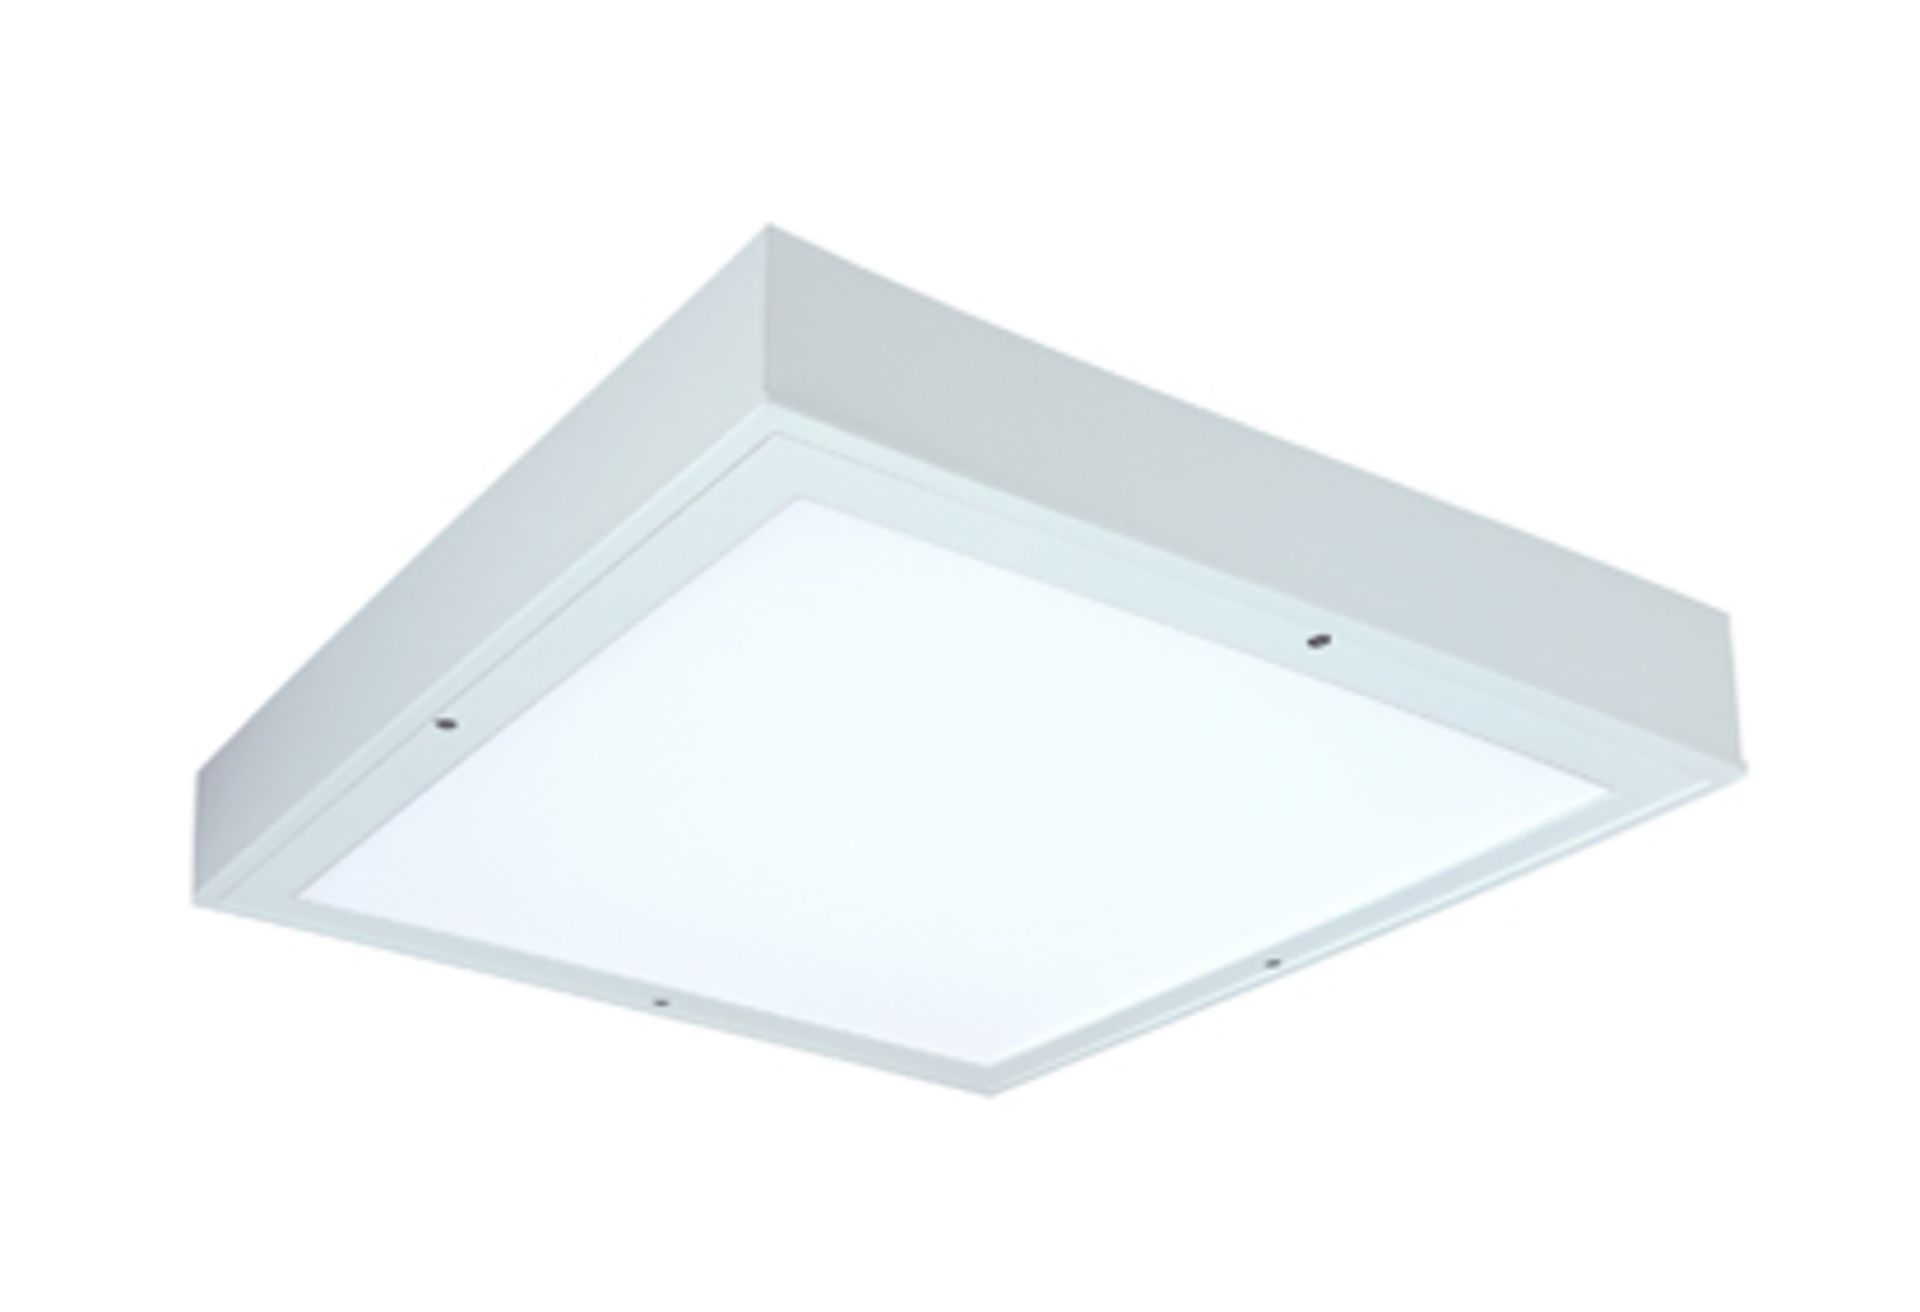 1 4200LM IP65 recessed Waterproof Fitting, 600mm x 600mm, product code T6REIP4250EZ (located on - Image 3 of 4